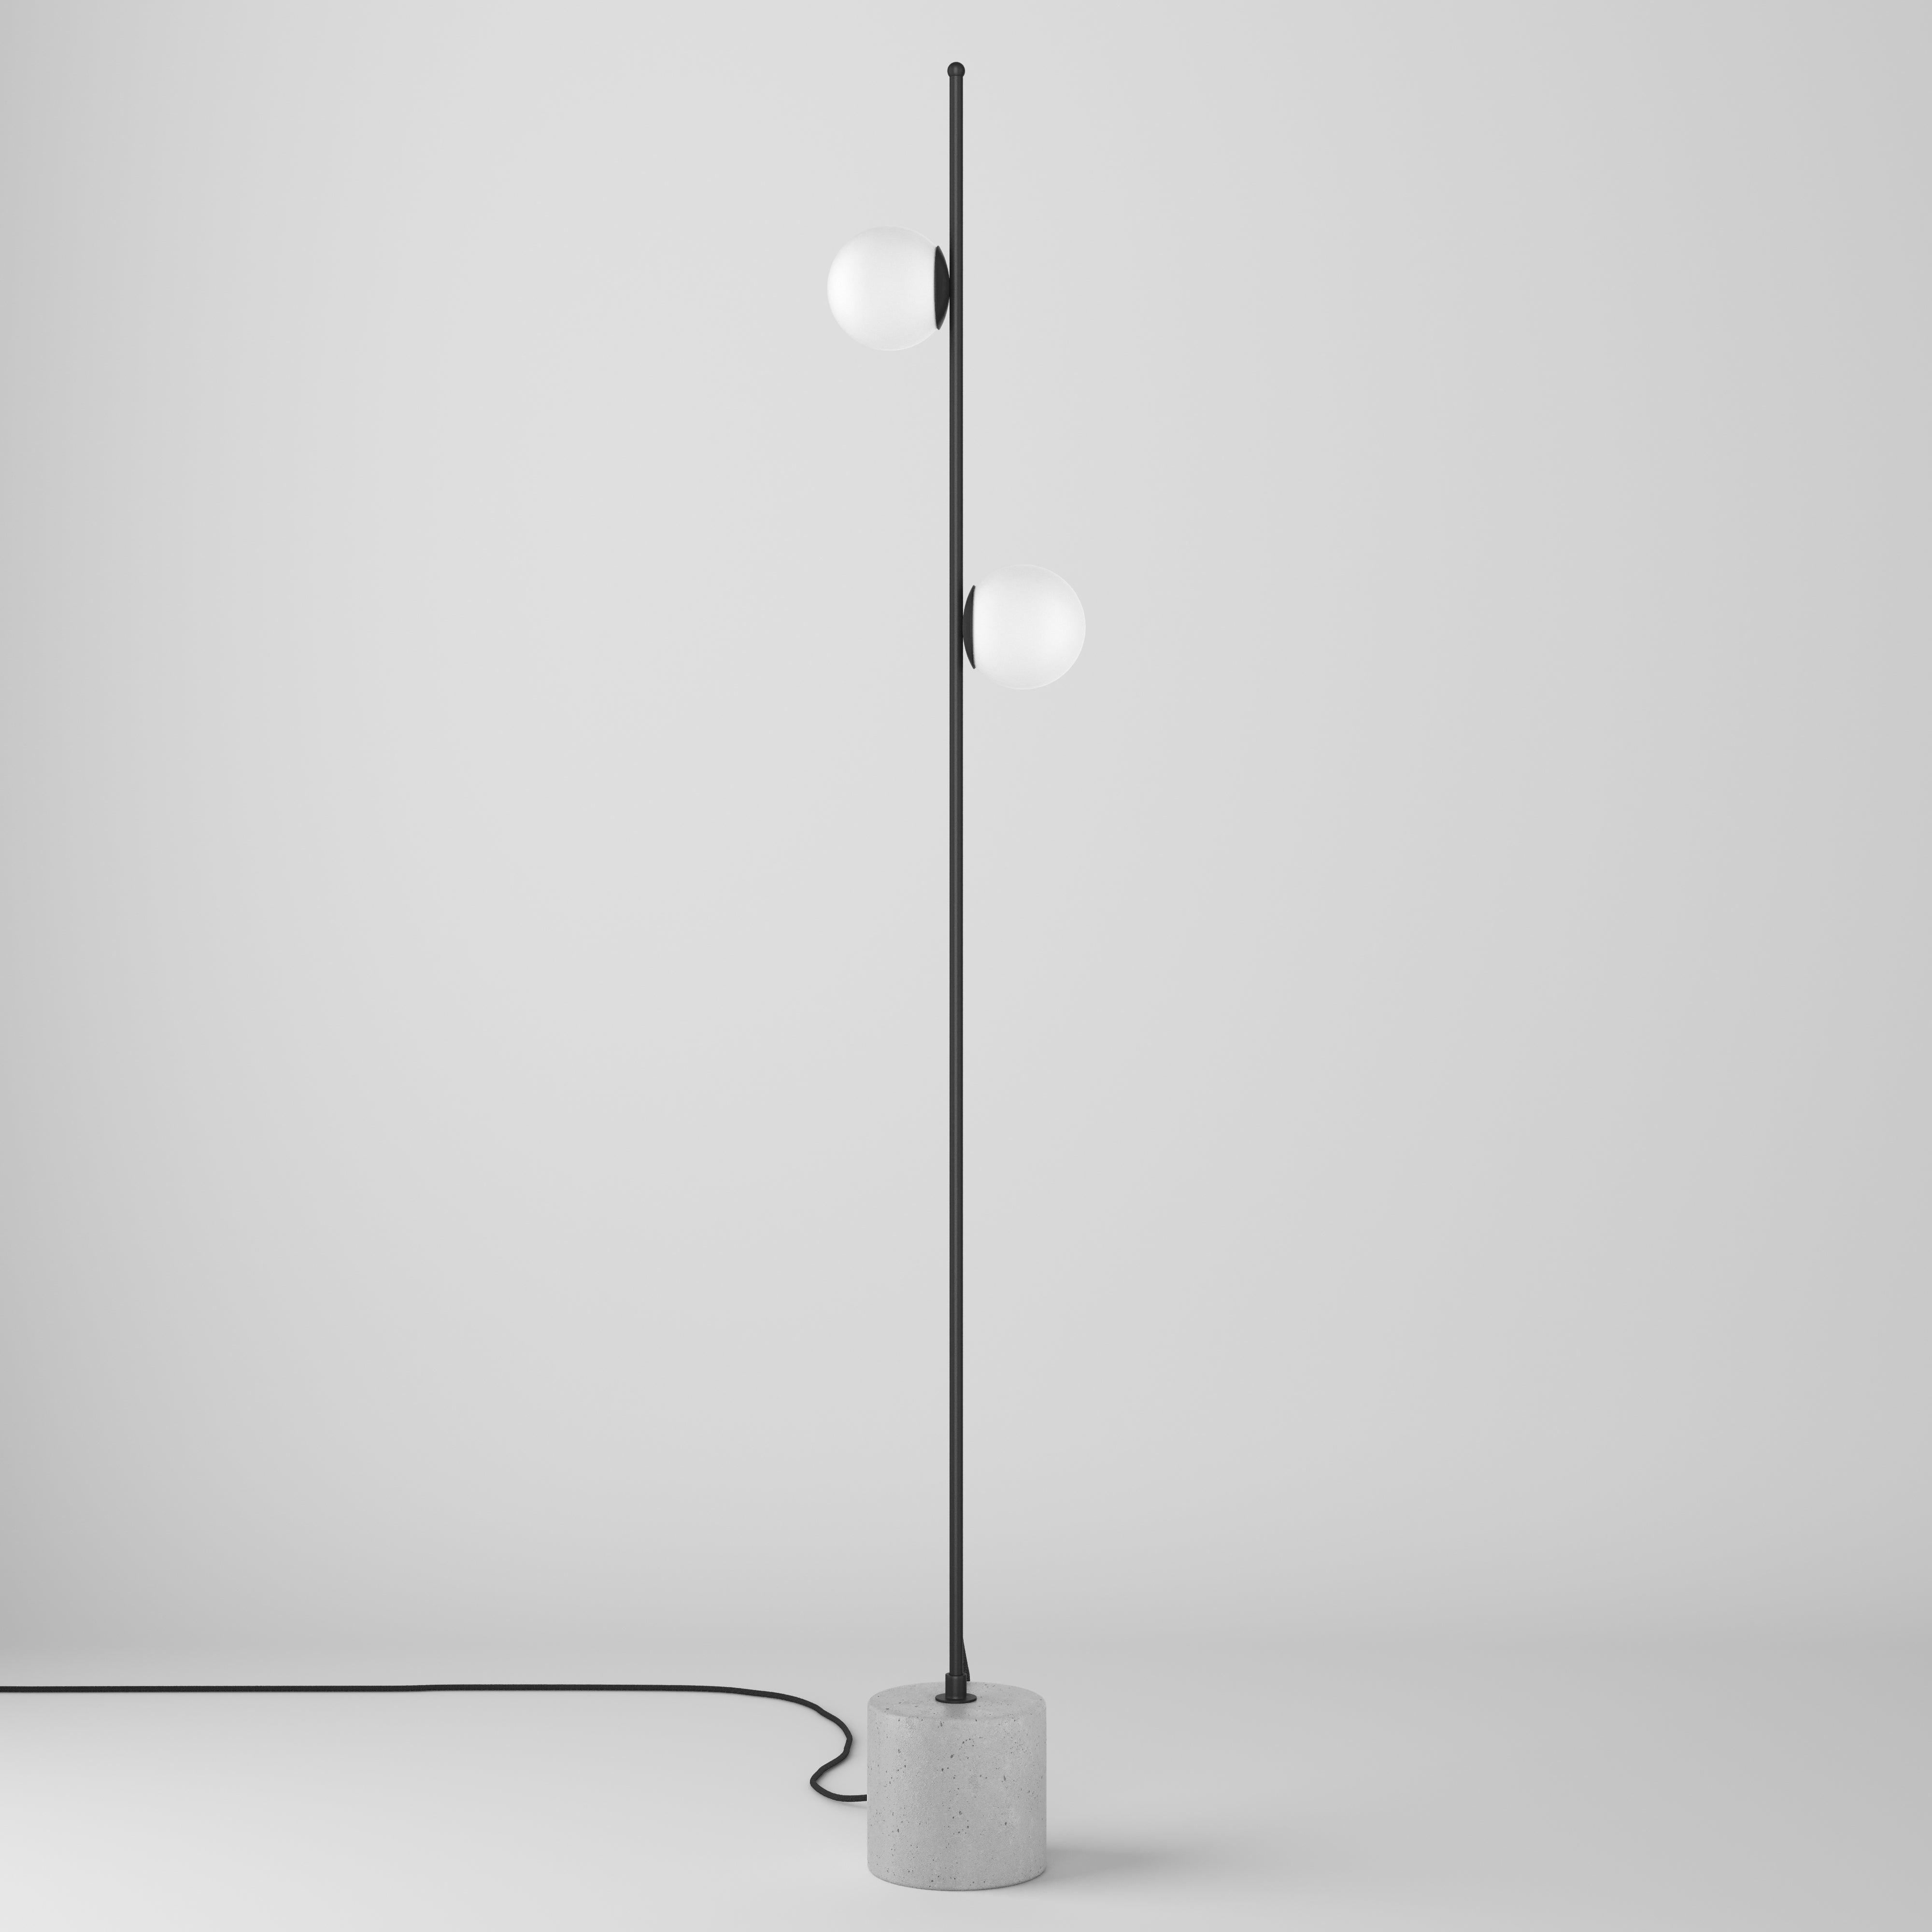 Bubble F (2glass sphere)

Category: Lighting
Type: Floor Lamp
Material: steel, frosted glass, textile cable
Overall dimensions: H: 1500 mm / W: 230 mm
Light source: 2 * G9, 110-220V
Available in different colors according to RAL Classic.

Options of